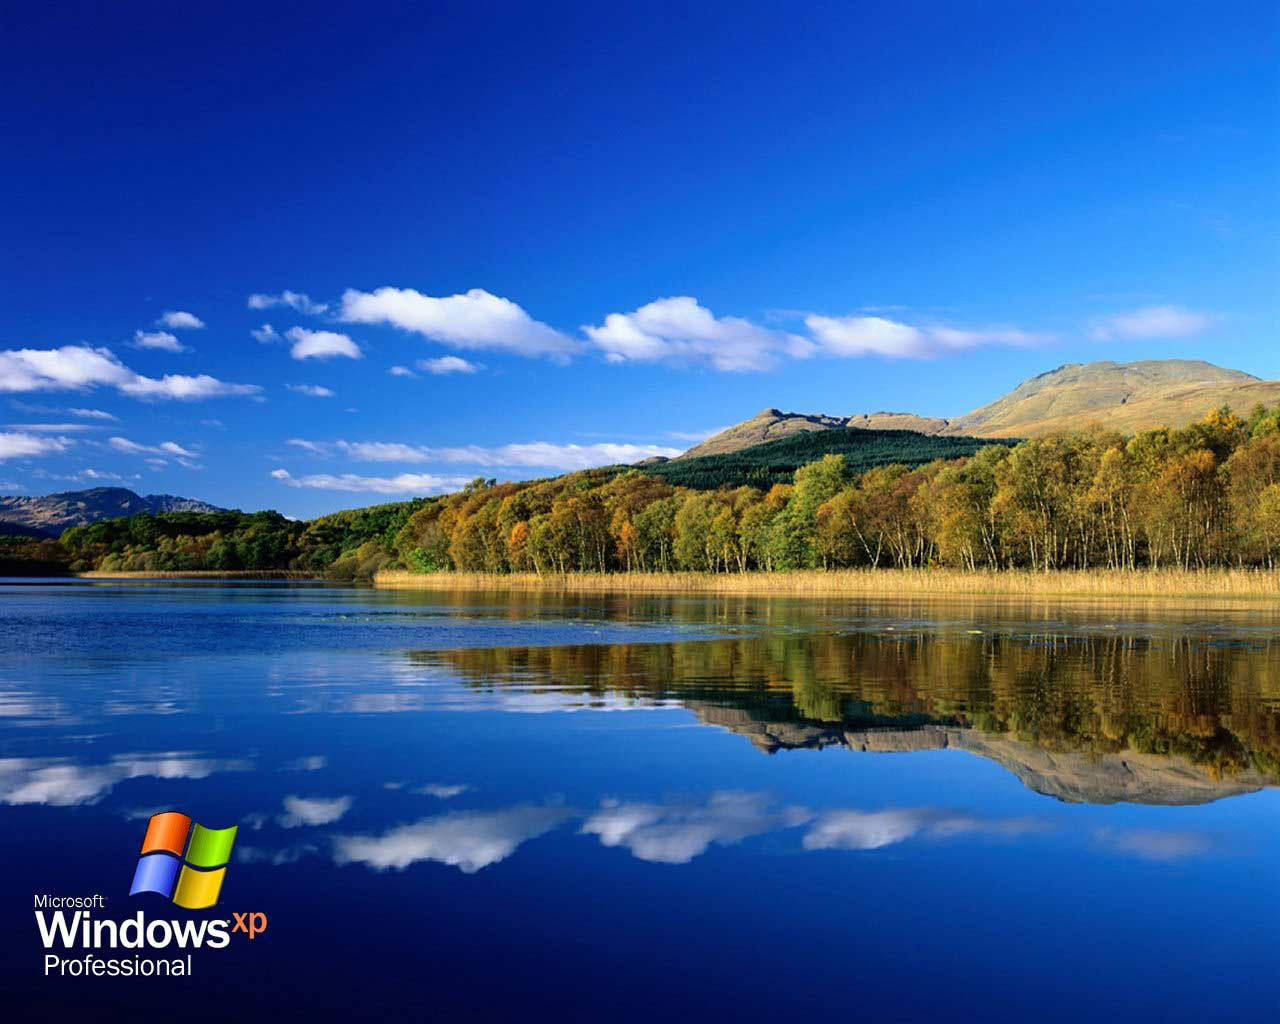 Windows Xp 1280X1024 Wallpaper and Background Image